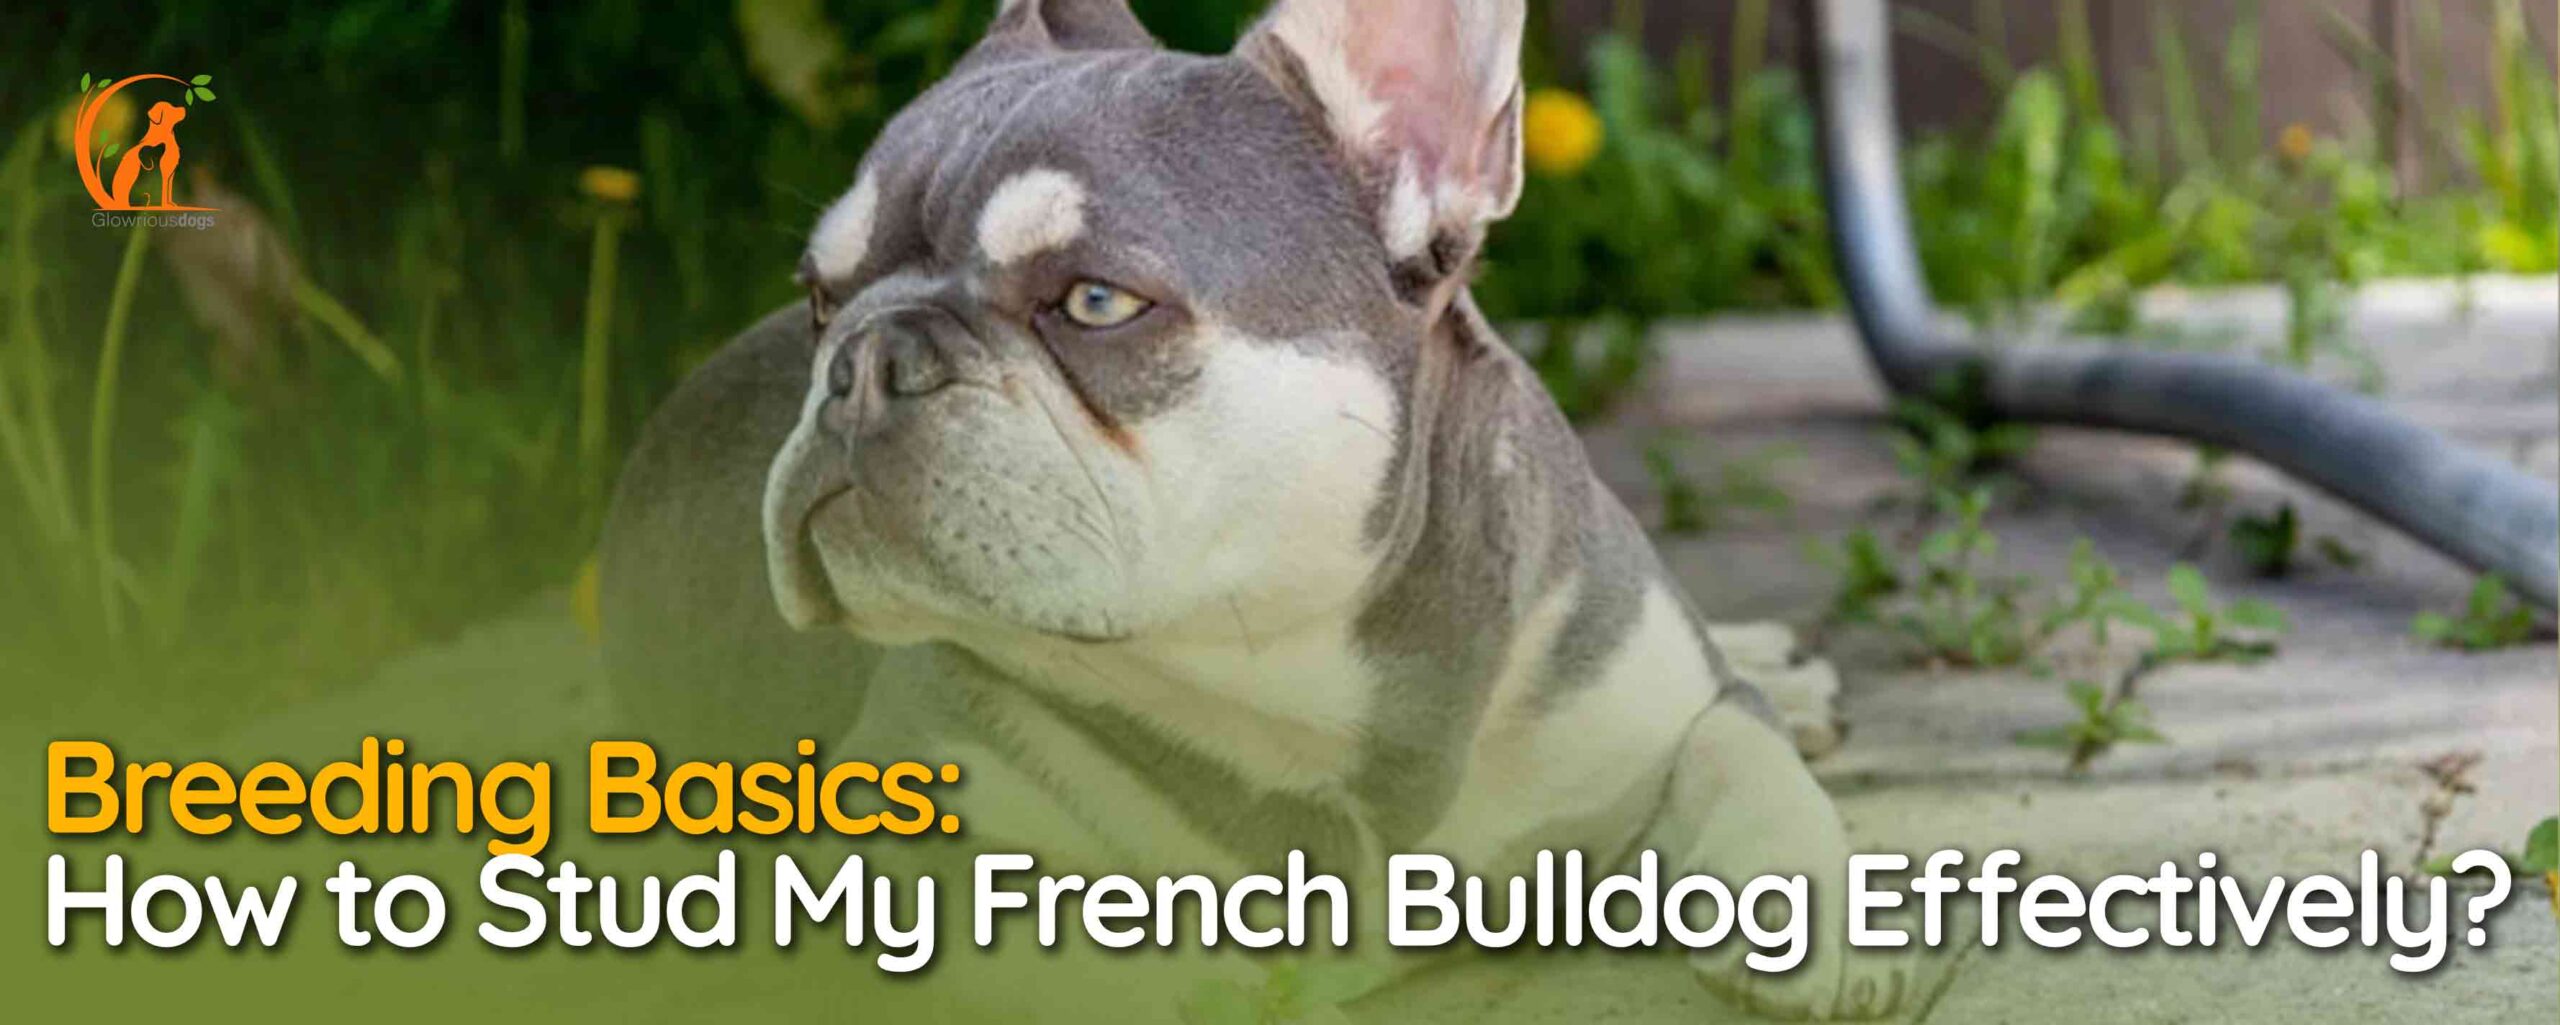 How to Stud My French Bulldog